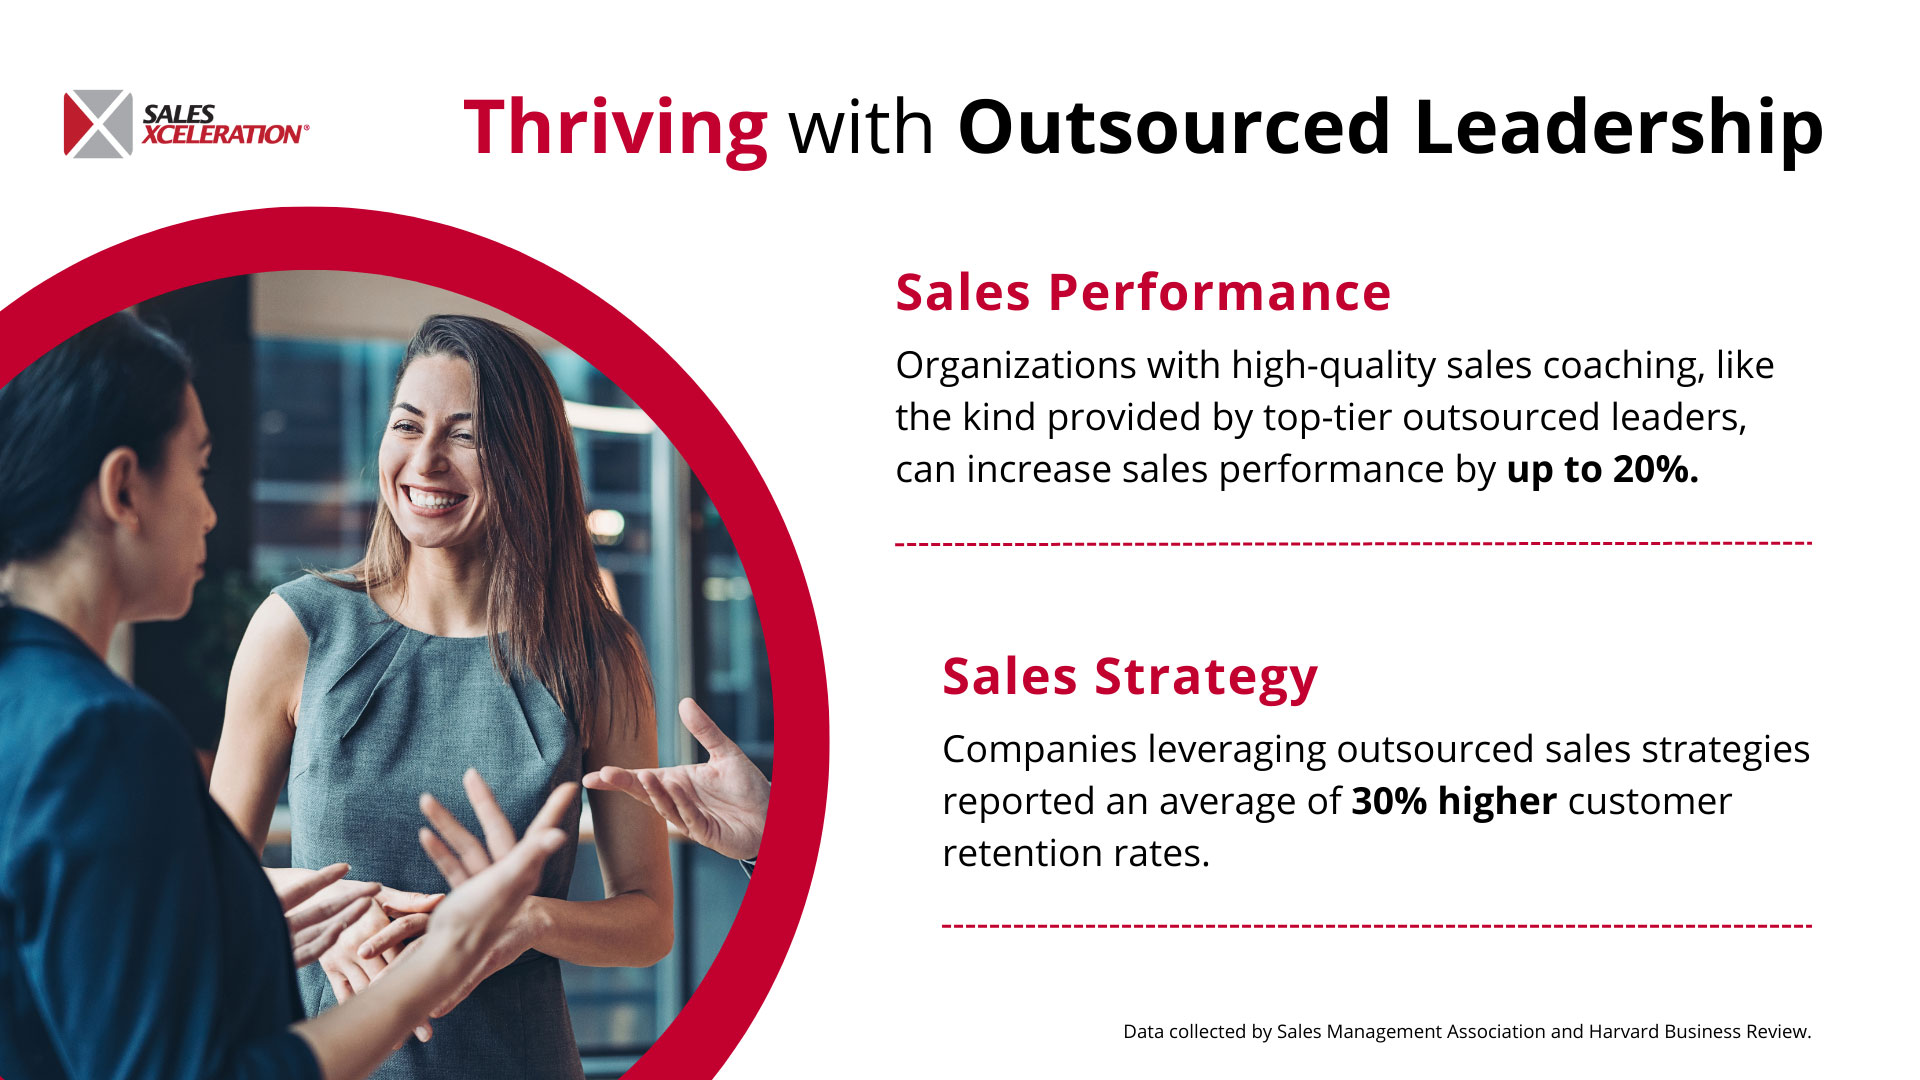 Graphic for Outsourced Sales Leadership including statistics to showcase positive results